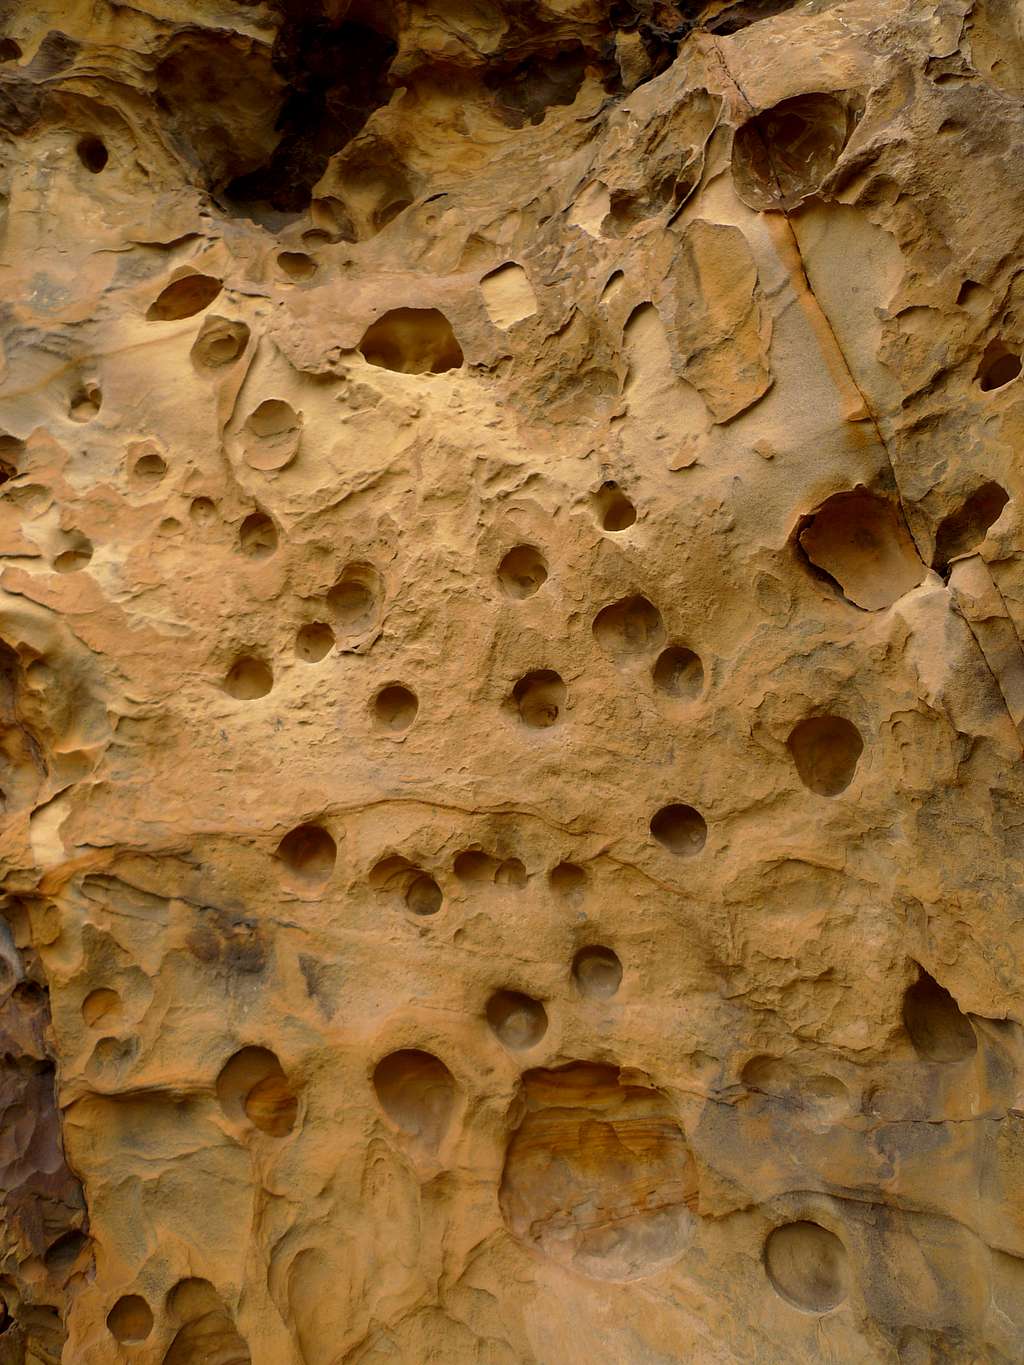 Holes in the cliff